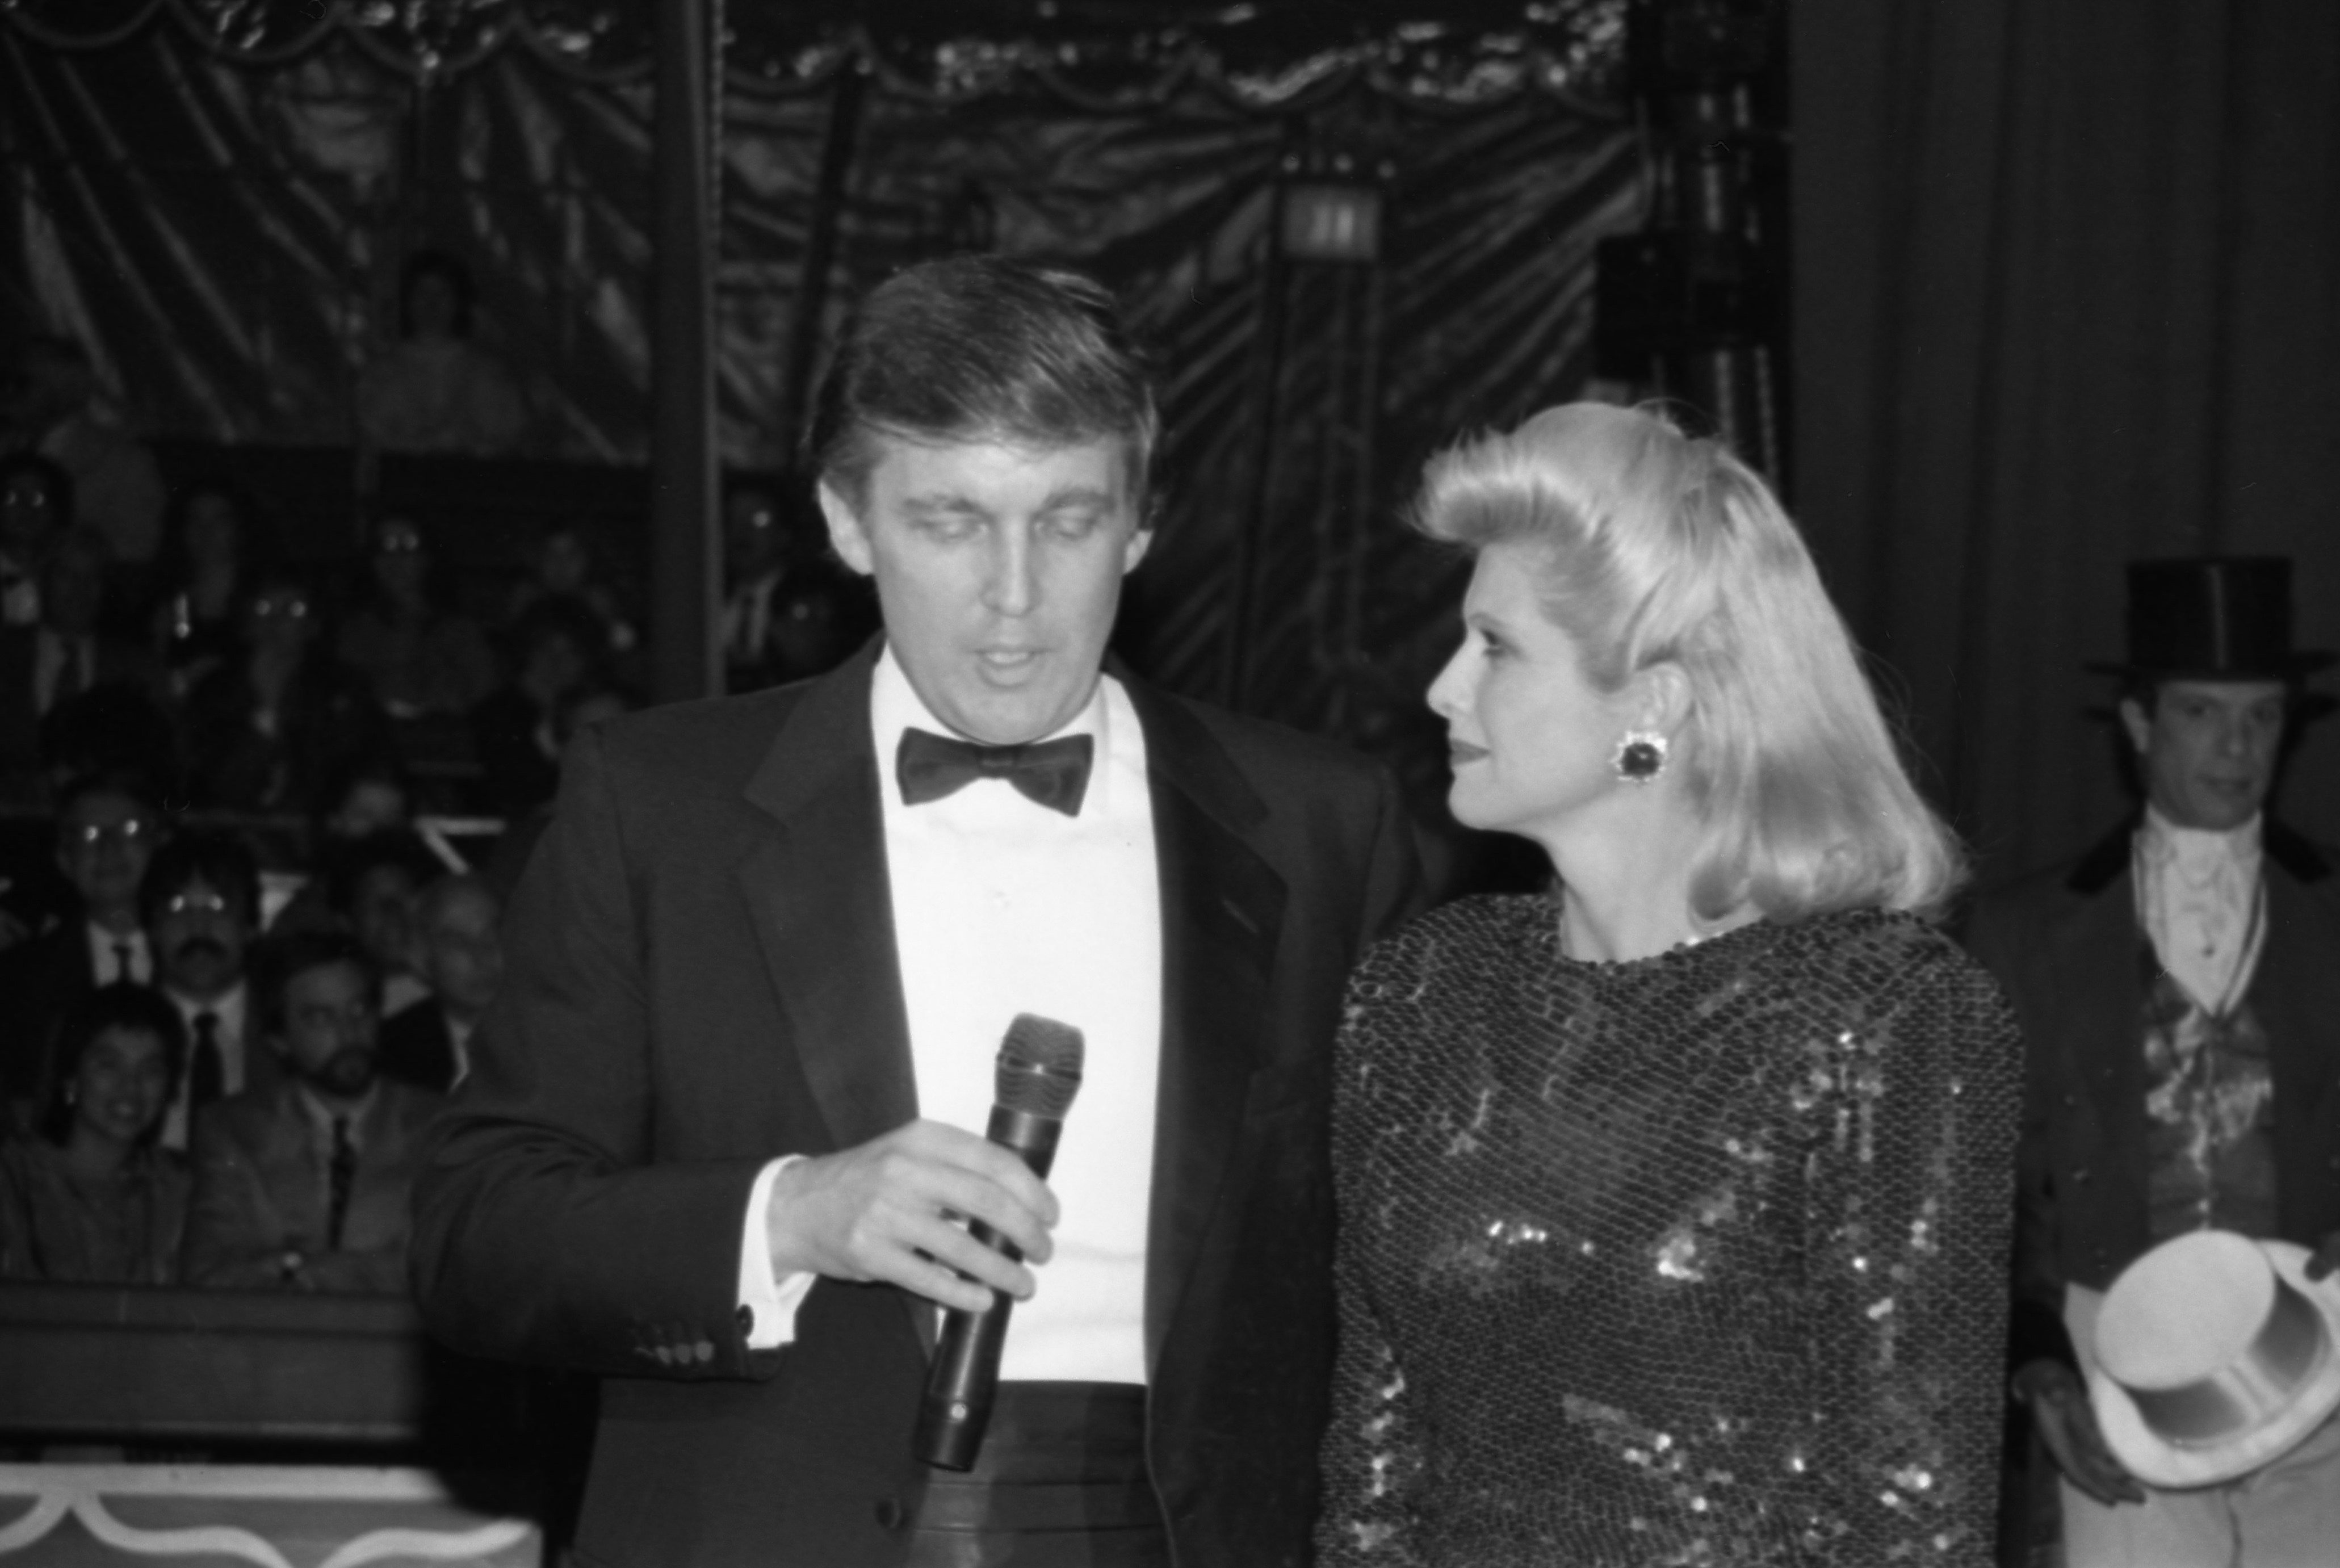 Donald Trump and Ivana Trump during 1001 Nights at the Big Apple Circus with ringmaster Paul Binder on November 16,1987 in New York, New York.┃Source: Getty Images